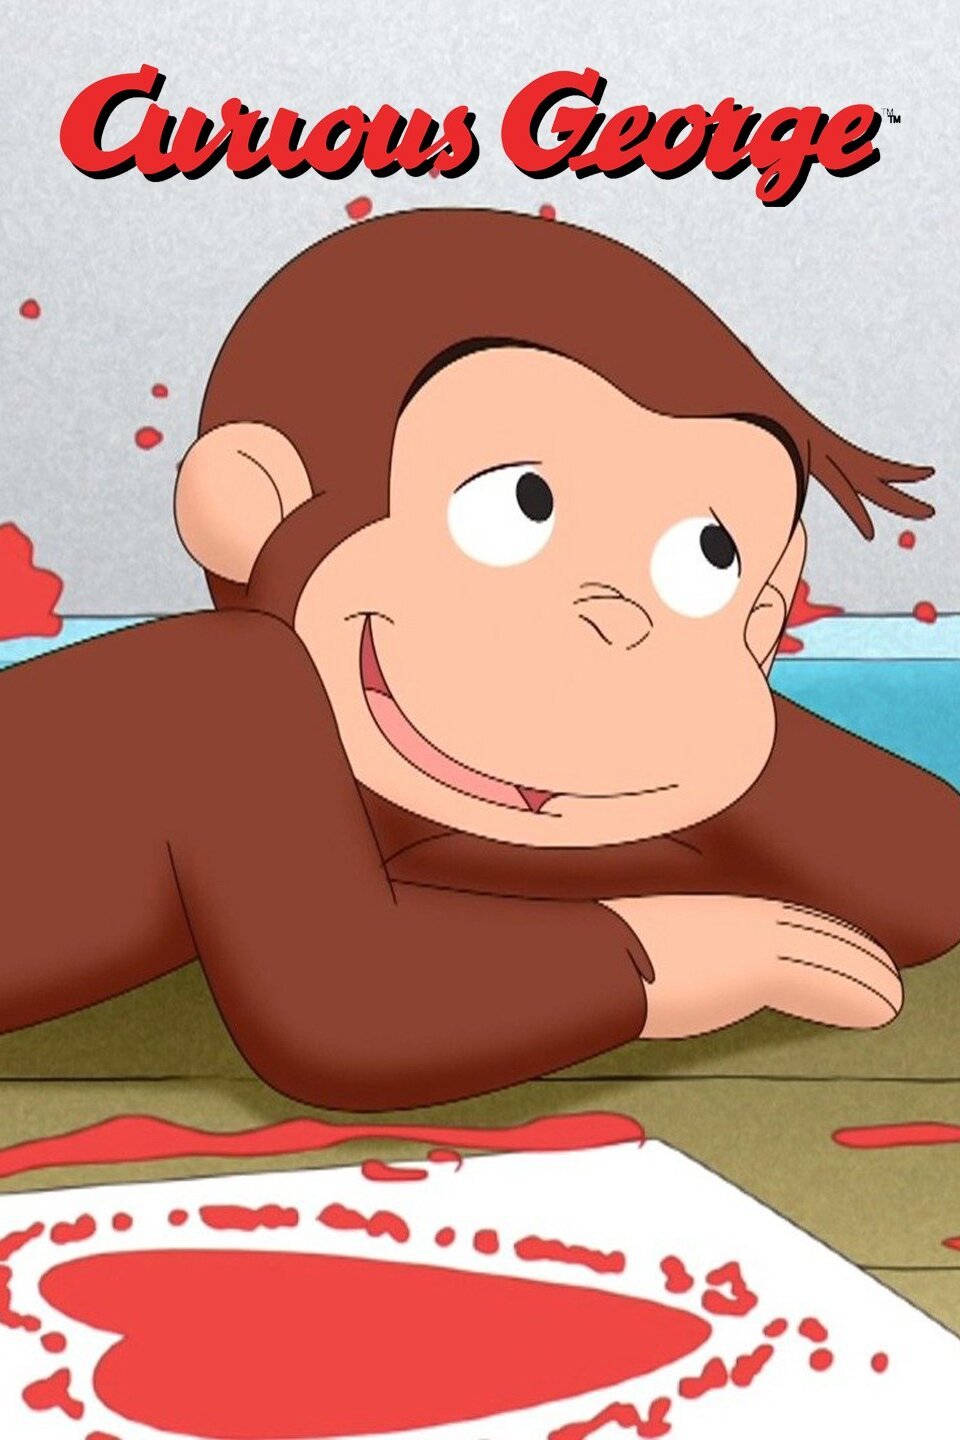 curious george episodes about numbers